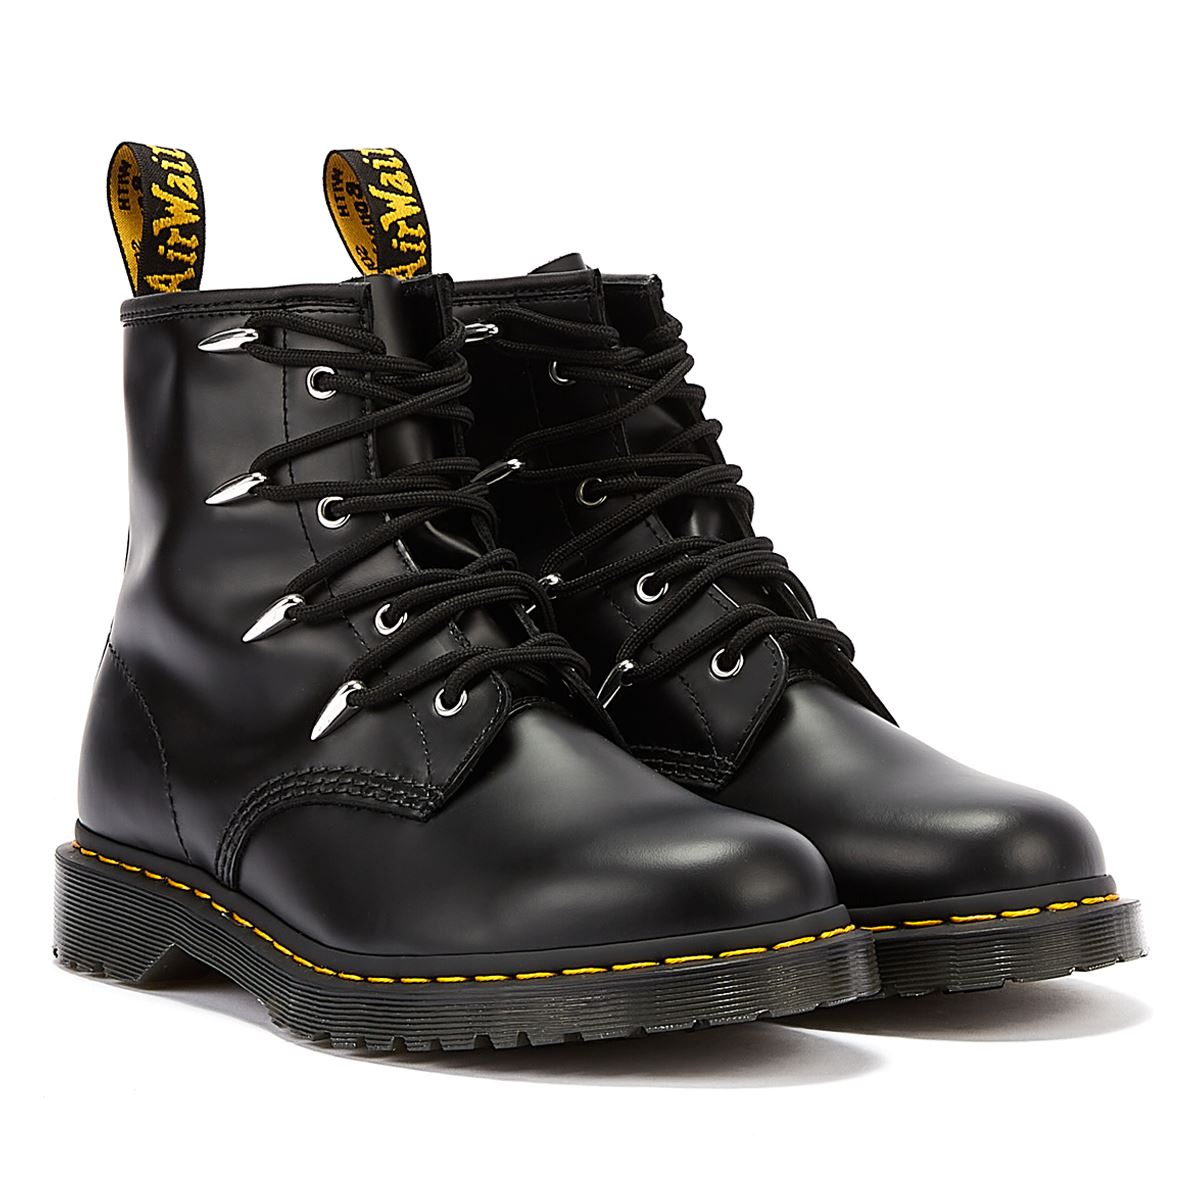 Dr. Martens 1460 Danuibo Leather Black Boots